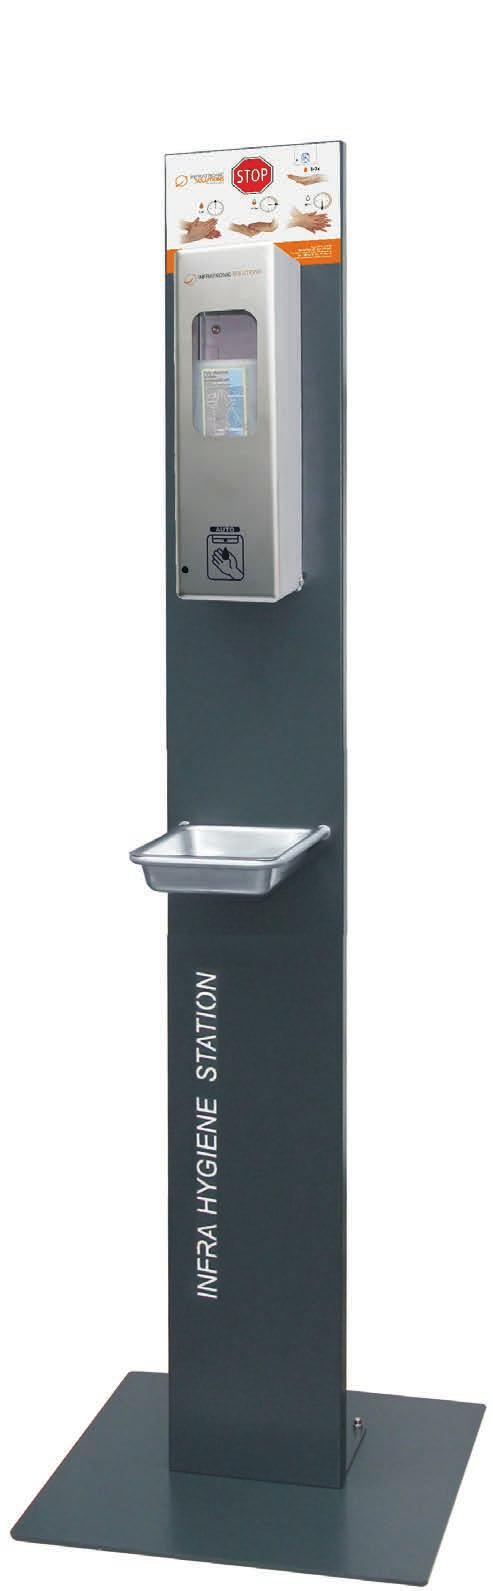 Hygiene station for entrance areas The touchless hygiene dispenser for entrance areas.